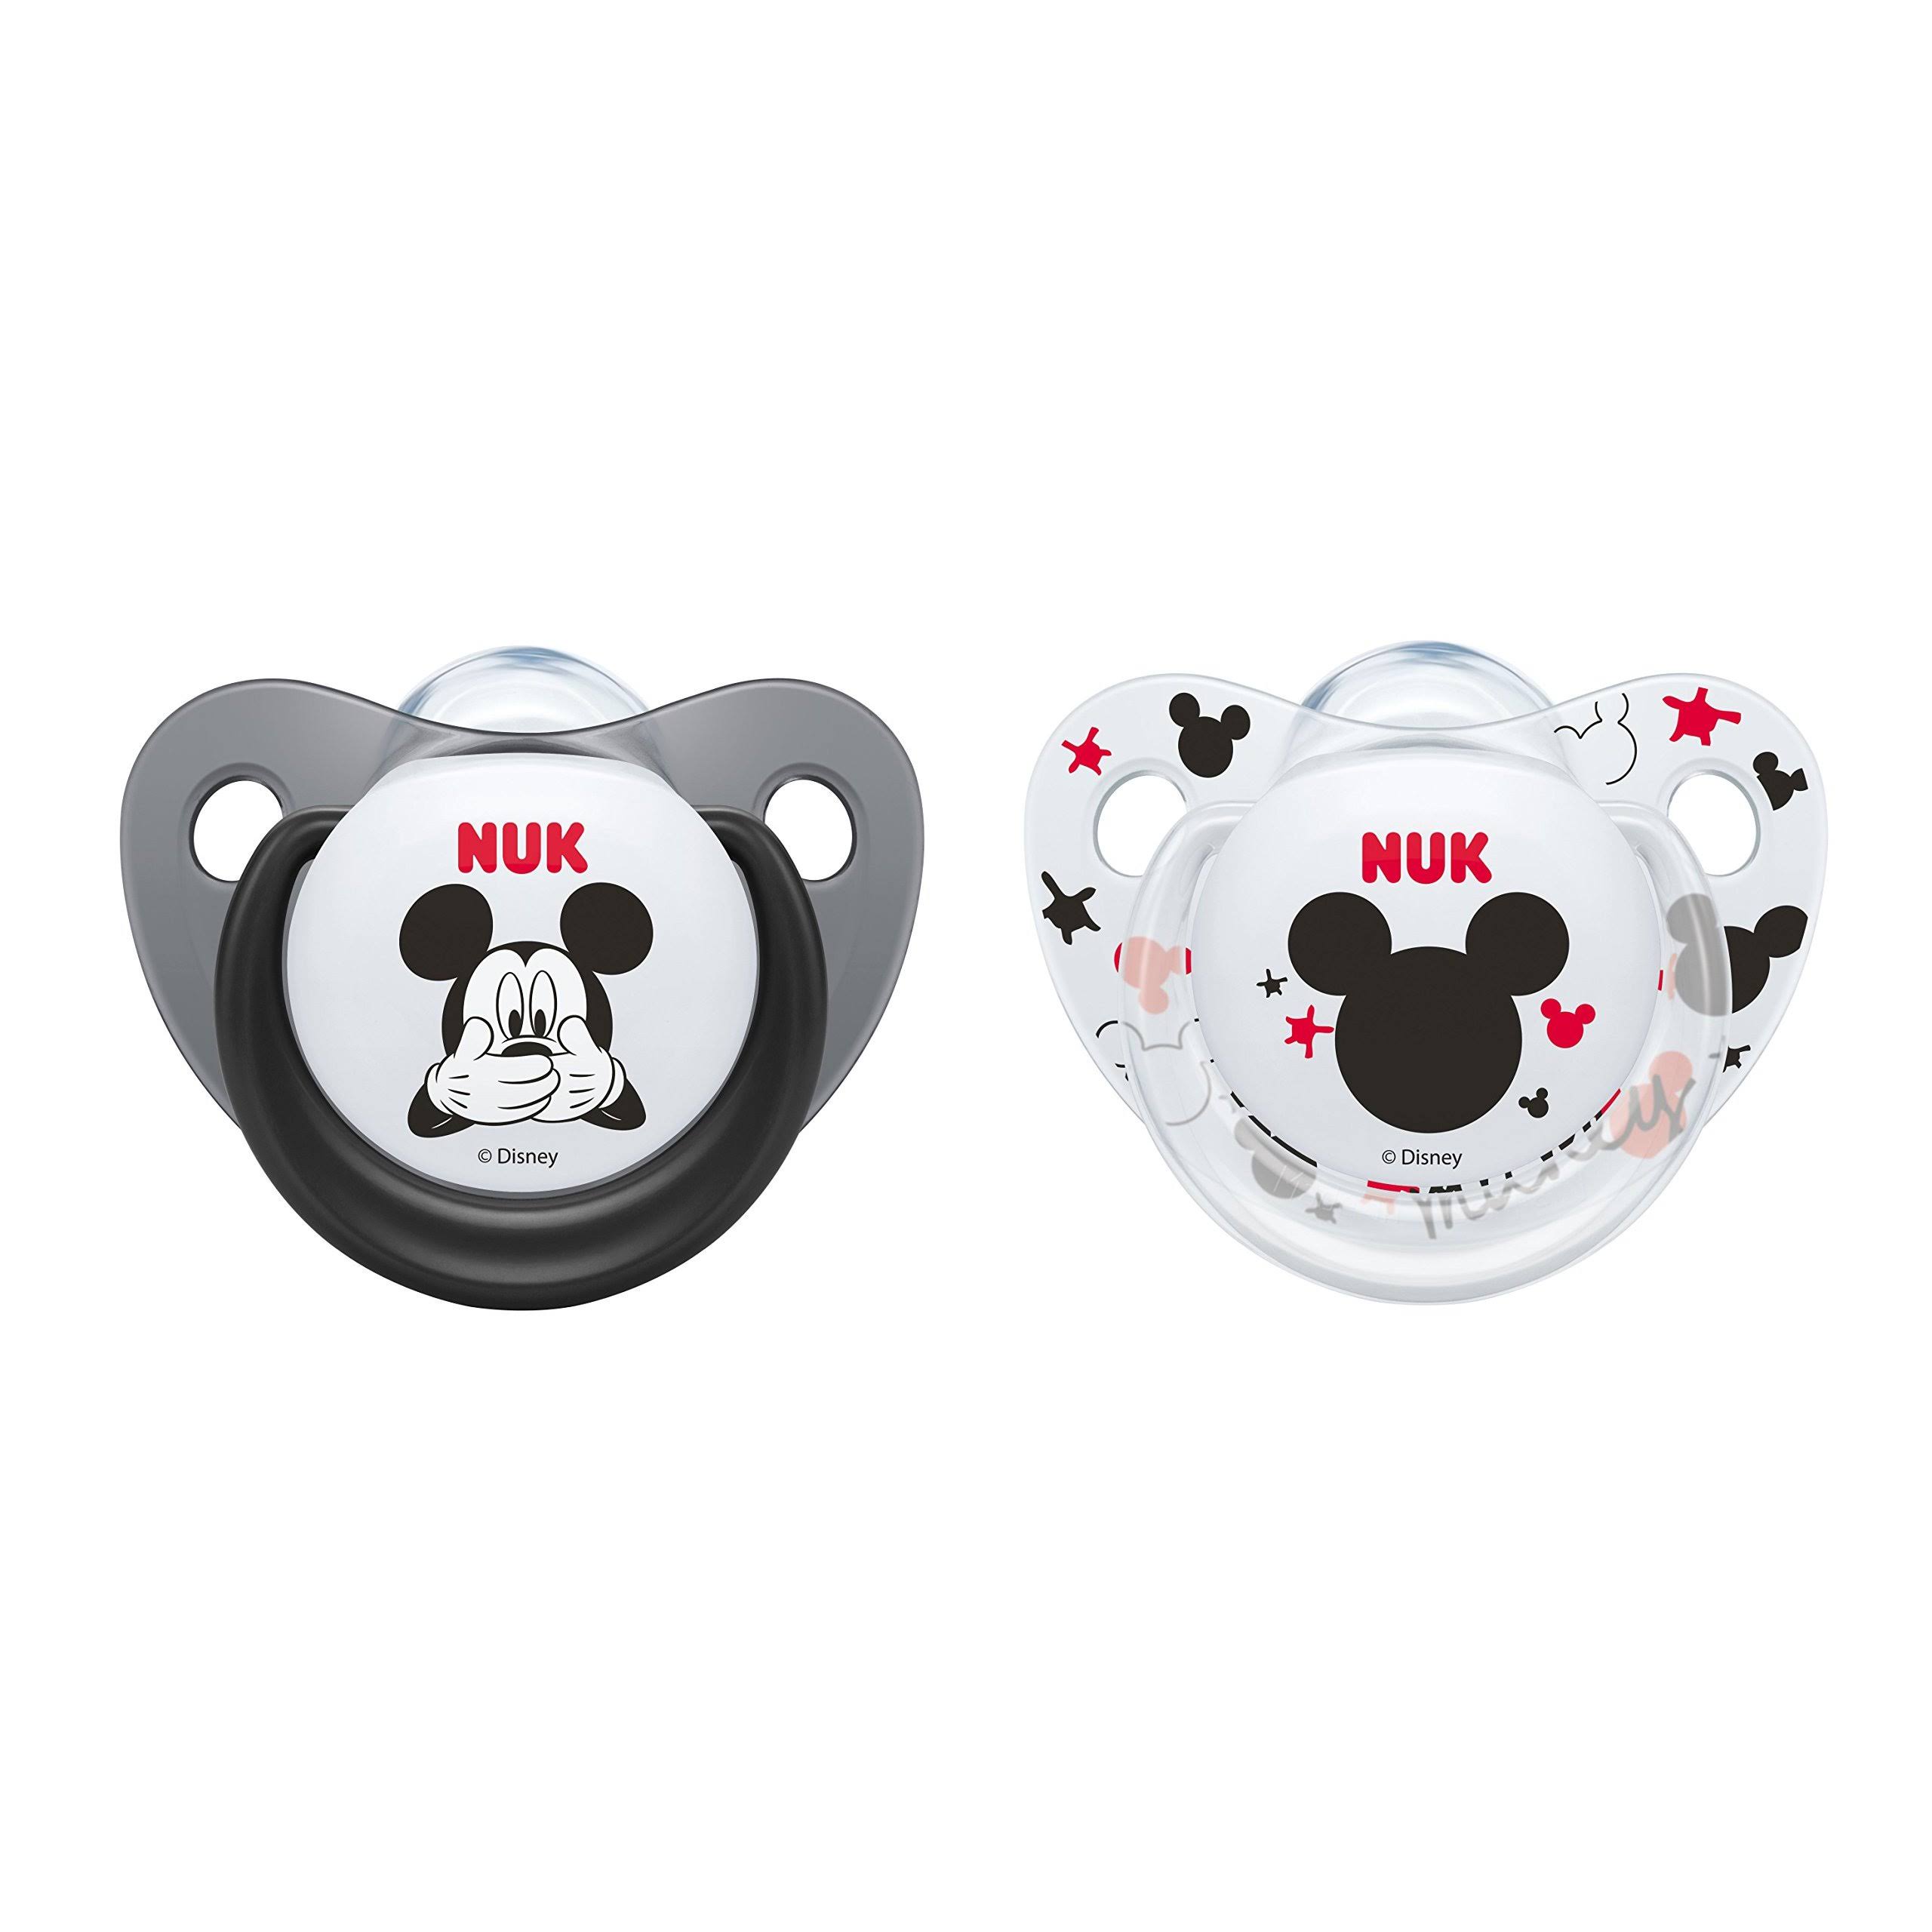 Disney Silicone Soother 6m+ 2 Soothers - NUK